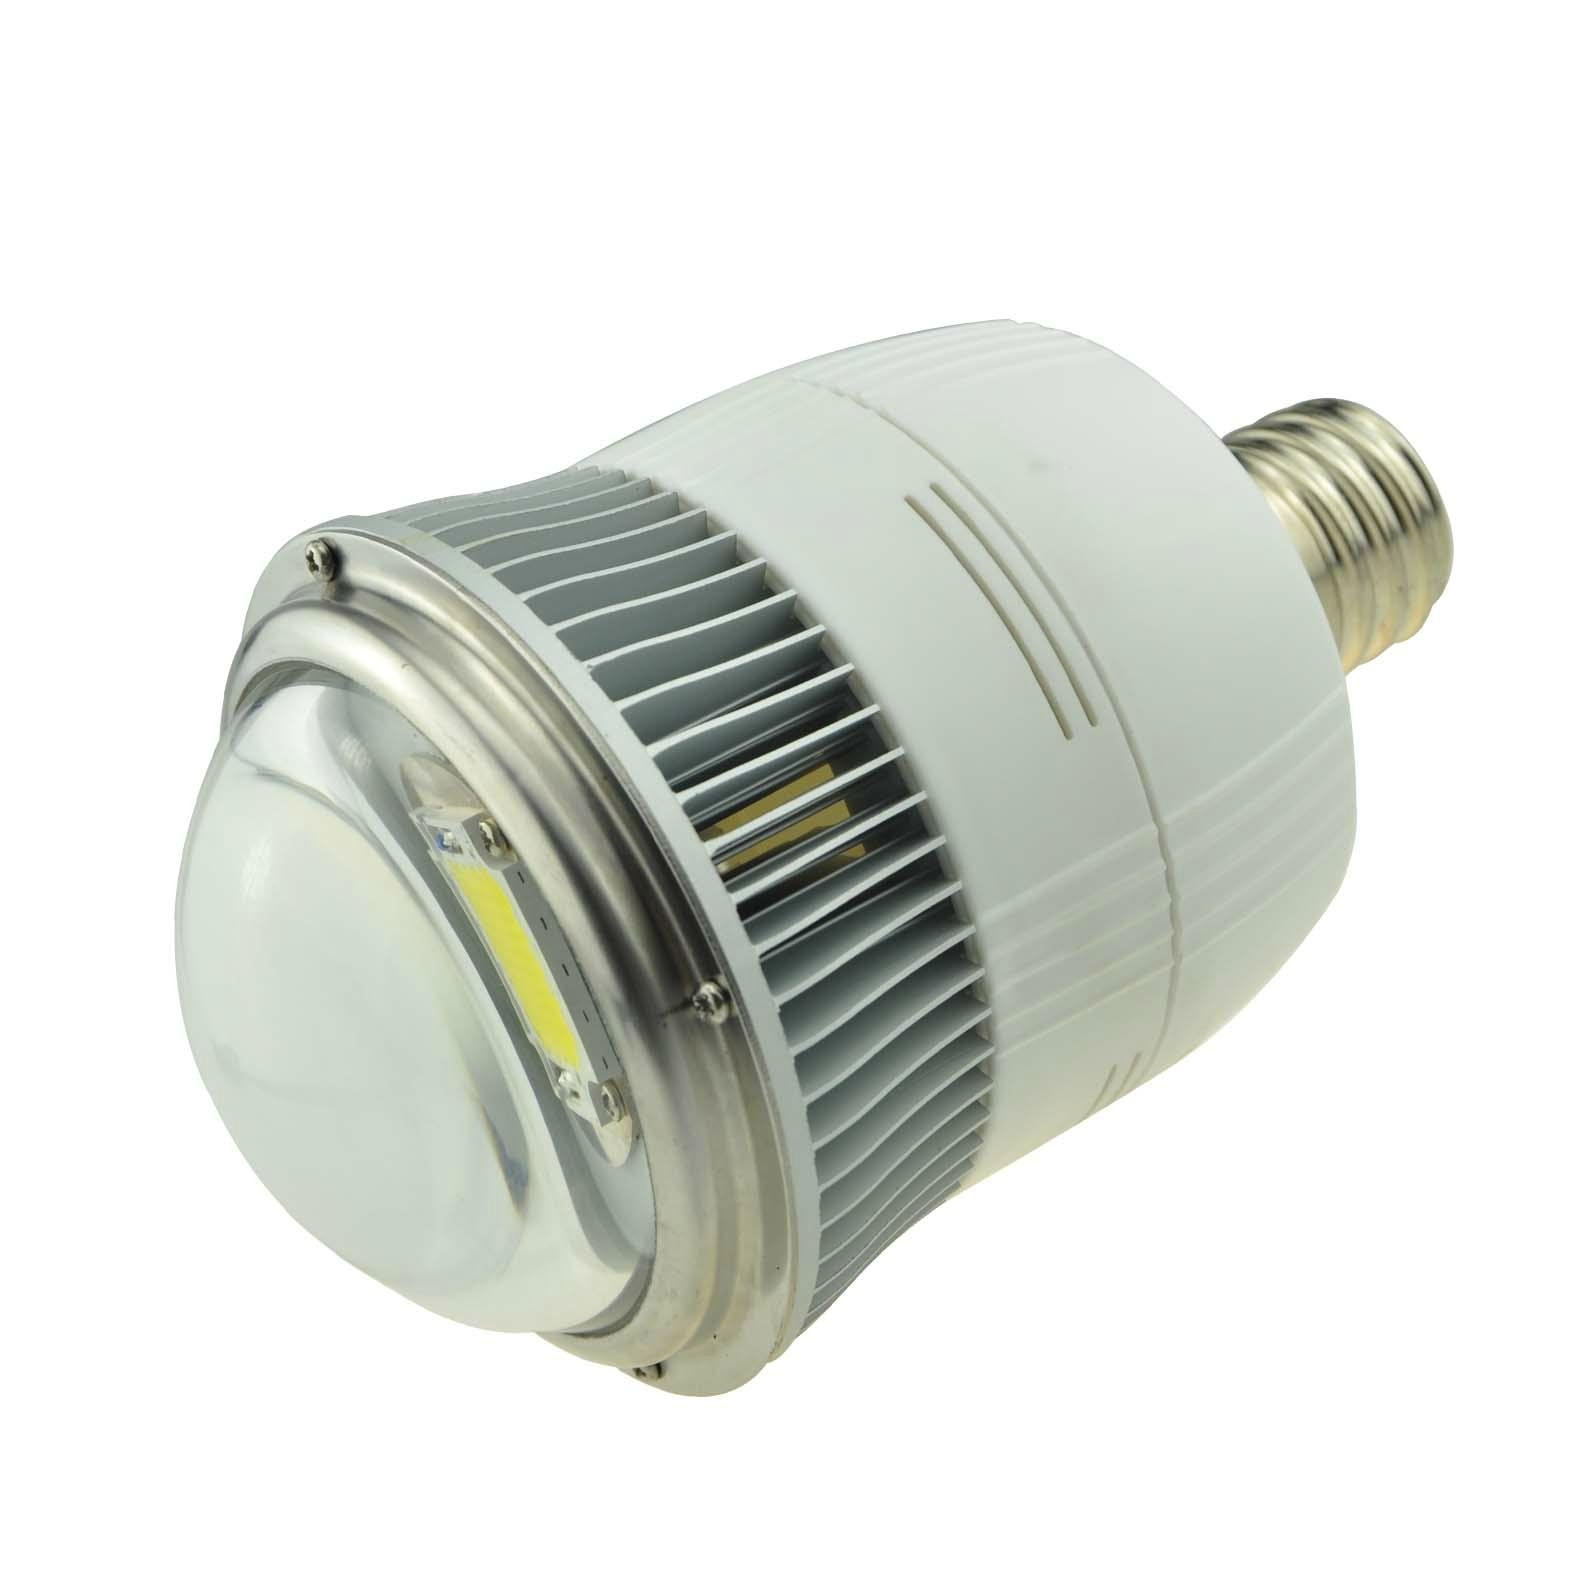 LED E40 mining light 20 w can replace 85 w energy-saving lamps 2